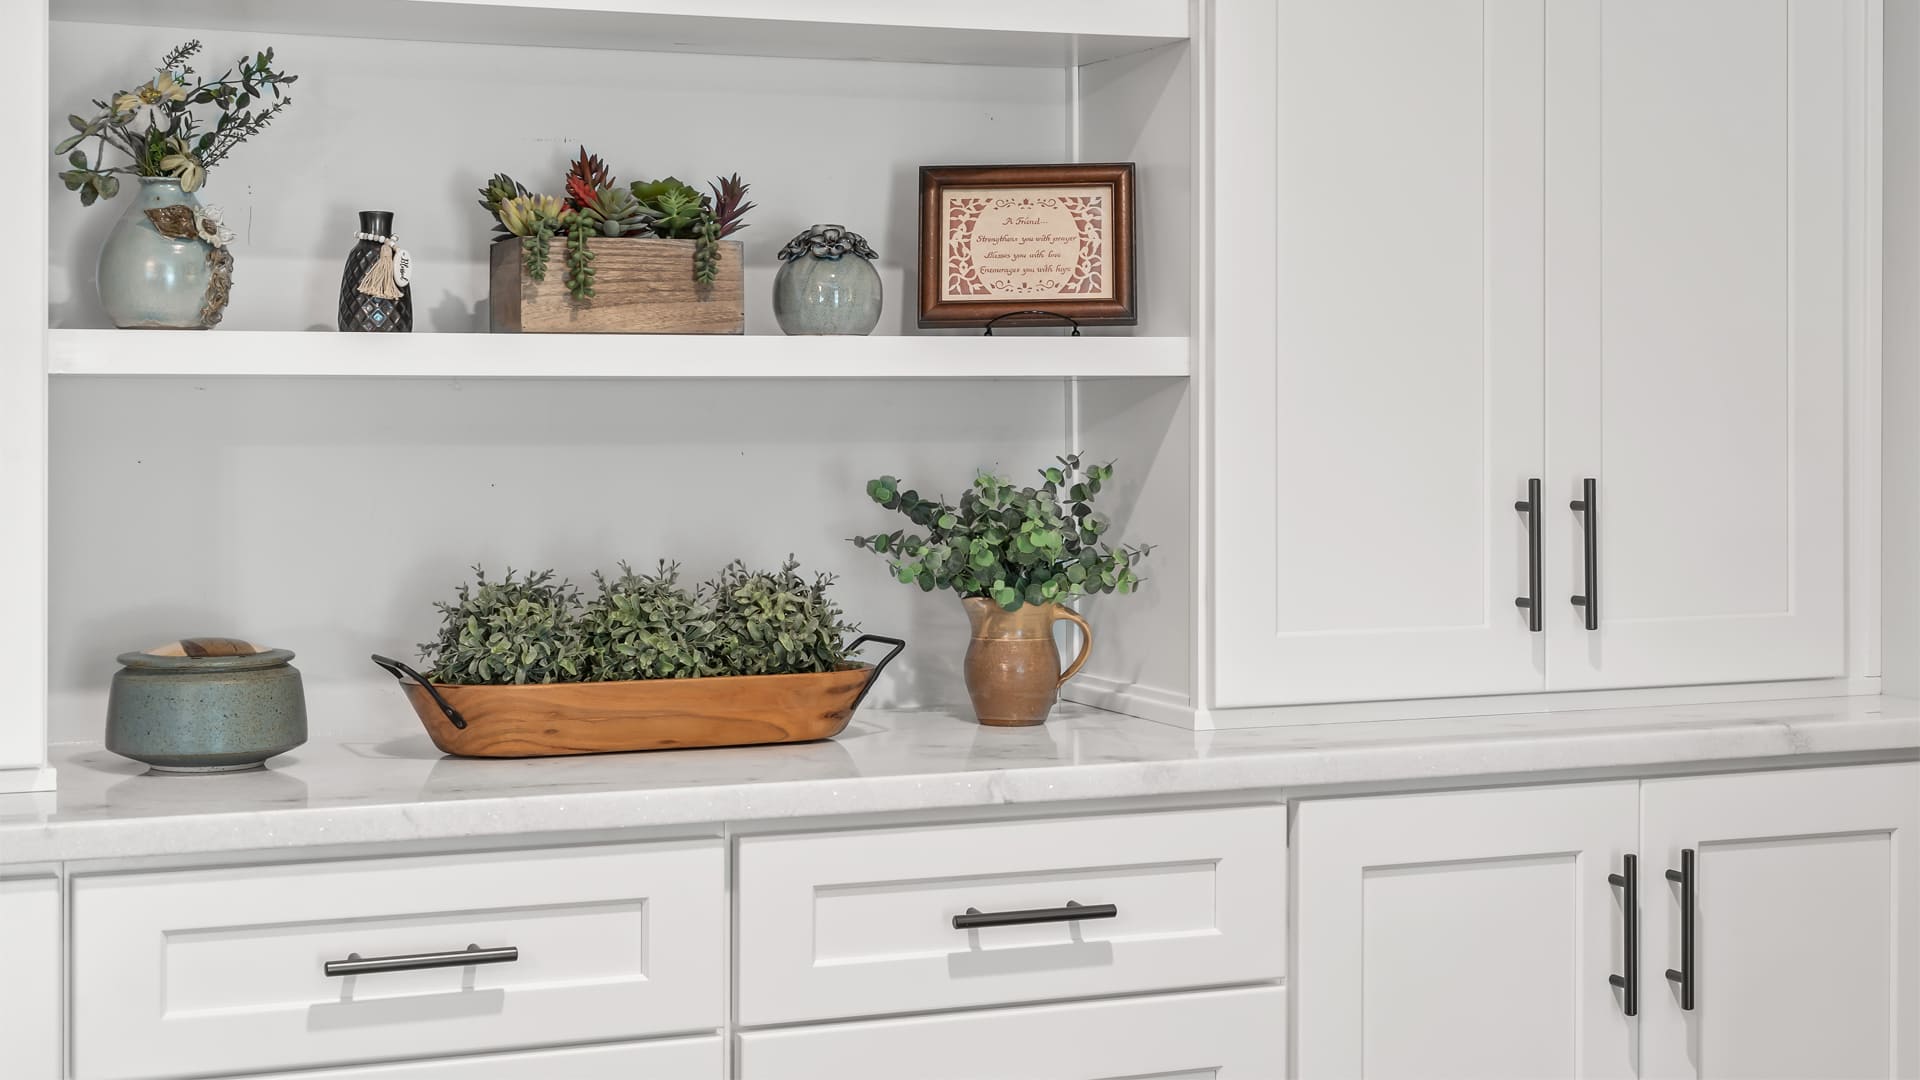 Close up of built-in cabinet storage with all-white shaker doors and drawers as well as upper open shelving for plants and decor